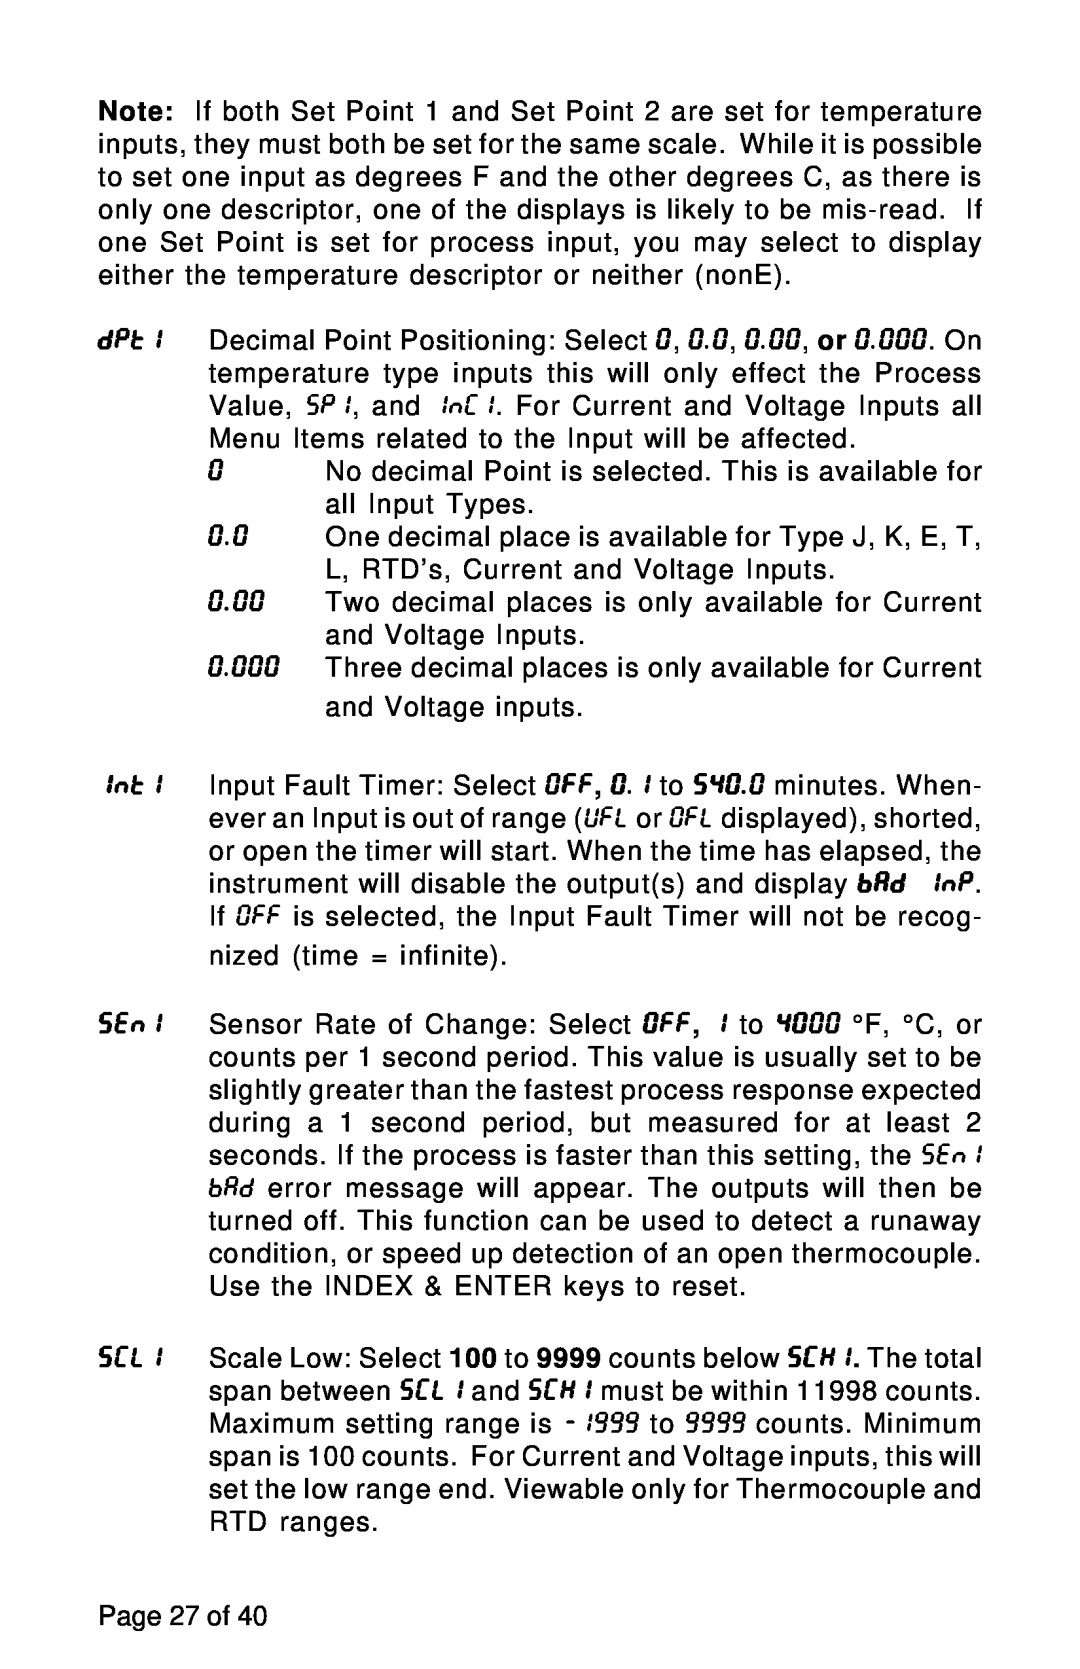 Omega Engineering CN 79000 manual nized time = infinite, Page 27 of 